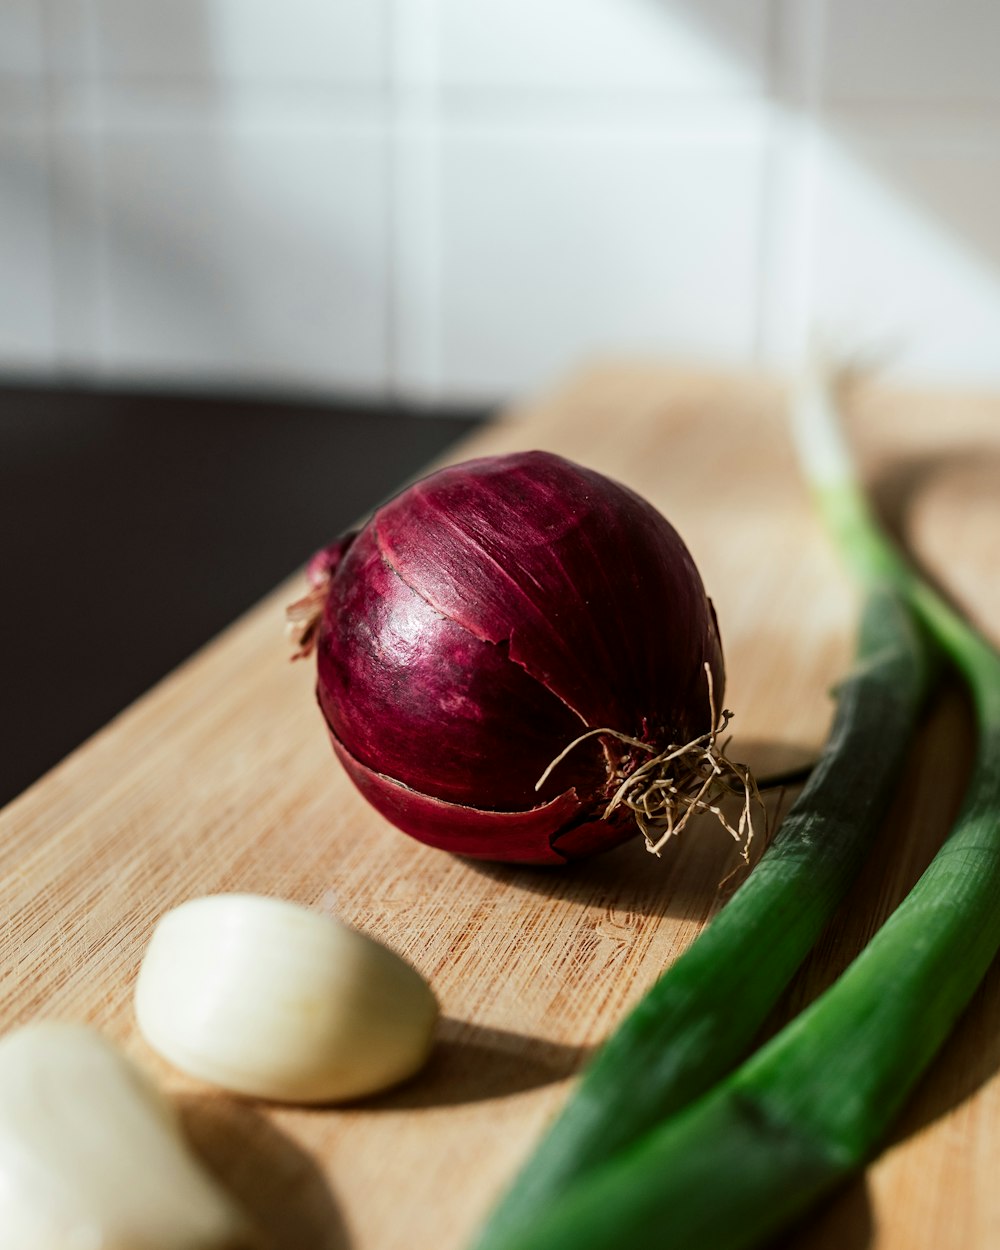 a red vegetable on a wooden surface